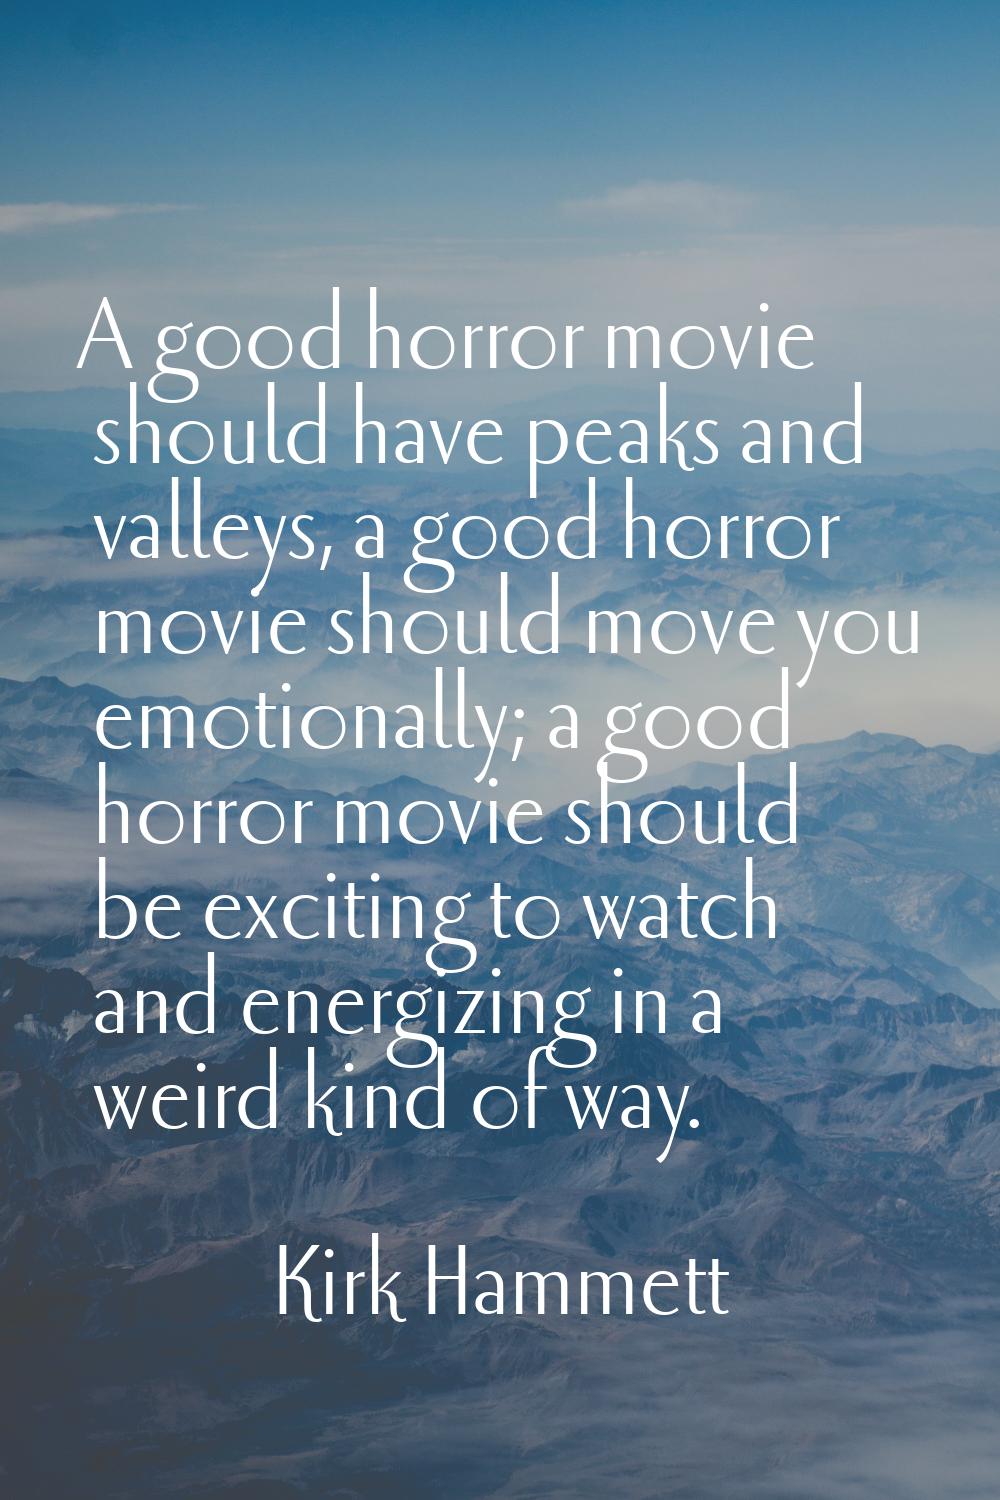 A good horror movie should have peaks and valleys, a good horror movie should move you emotionally;